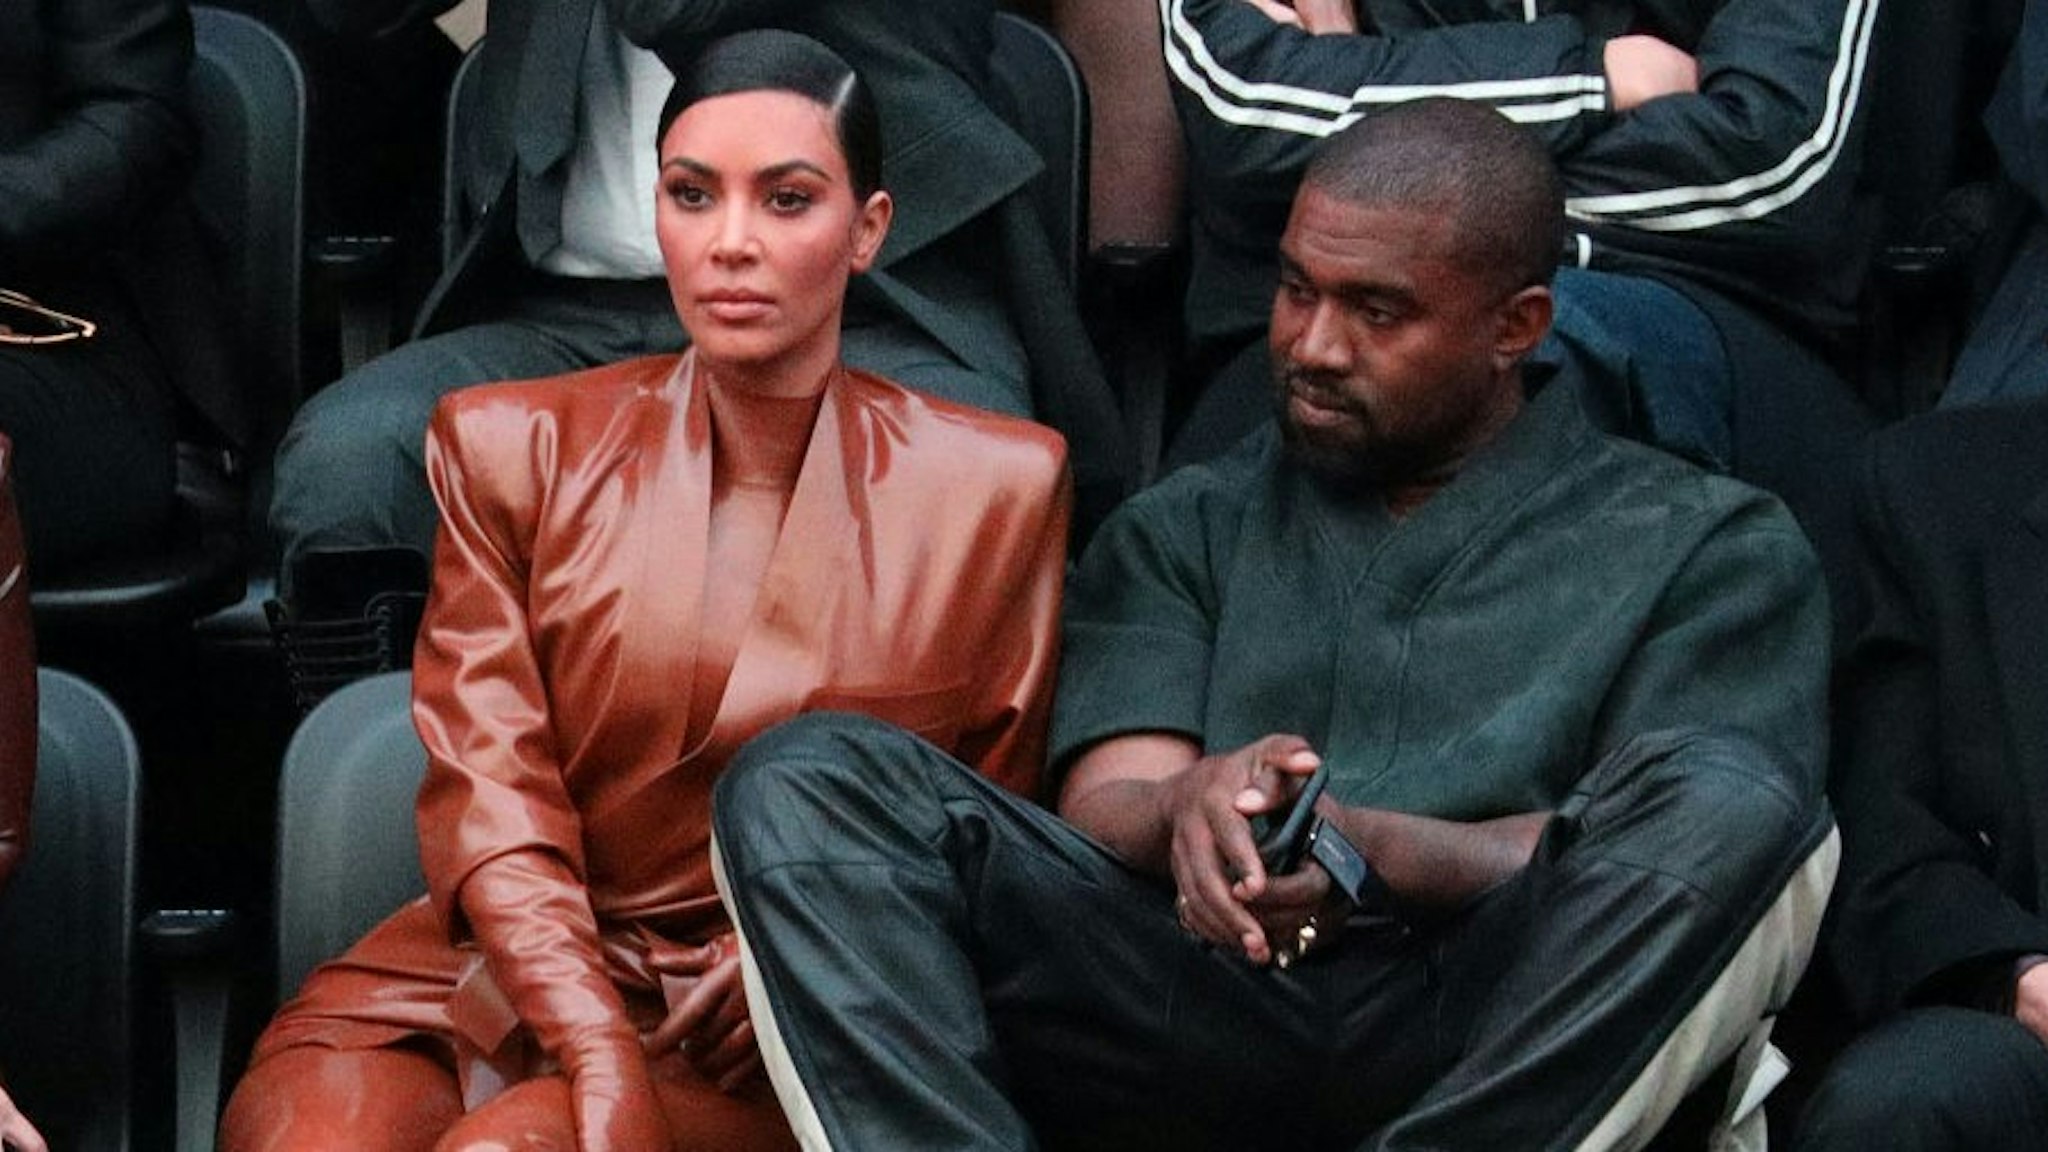 PARIS, FRANCE - MARCH 01: (EDITORIAL USE ONLY) Kim Kardashian and Kanye West attend the Balenciaga show as part of the Paris Fashion Week Womenswear Fall/Winter 2020/2021 on March 01, 2020 in Paris, France. (Photo by